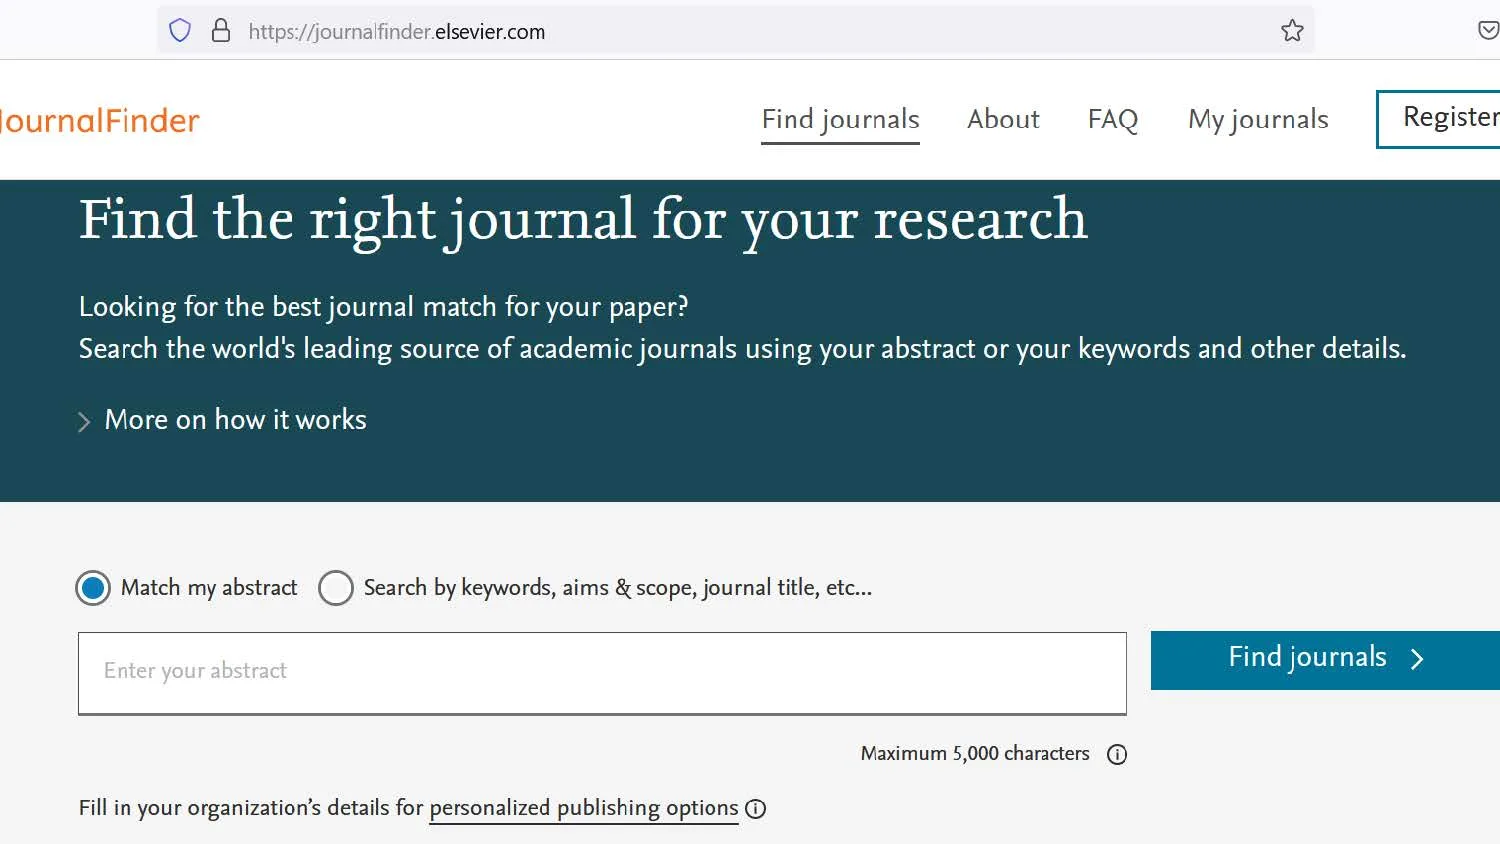 Finding the best journal for a paper